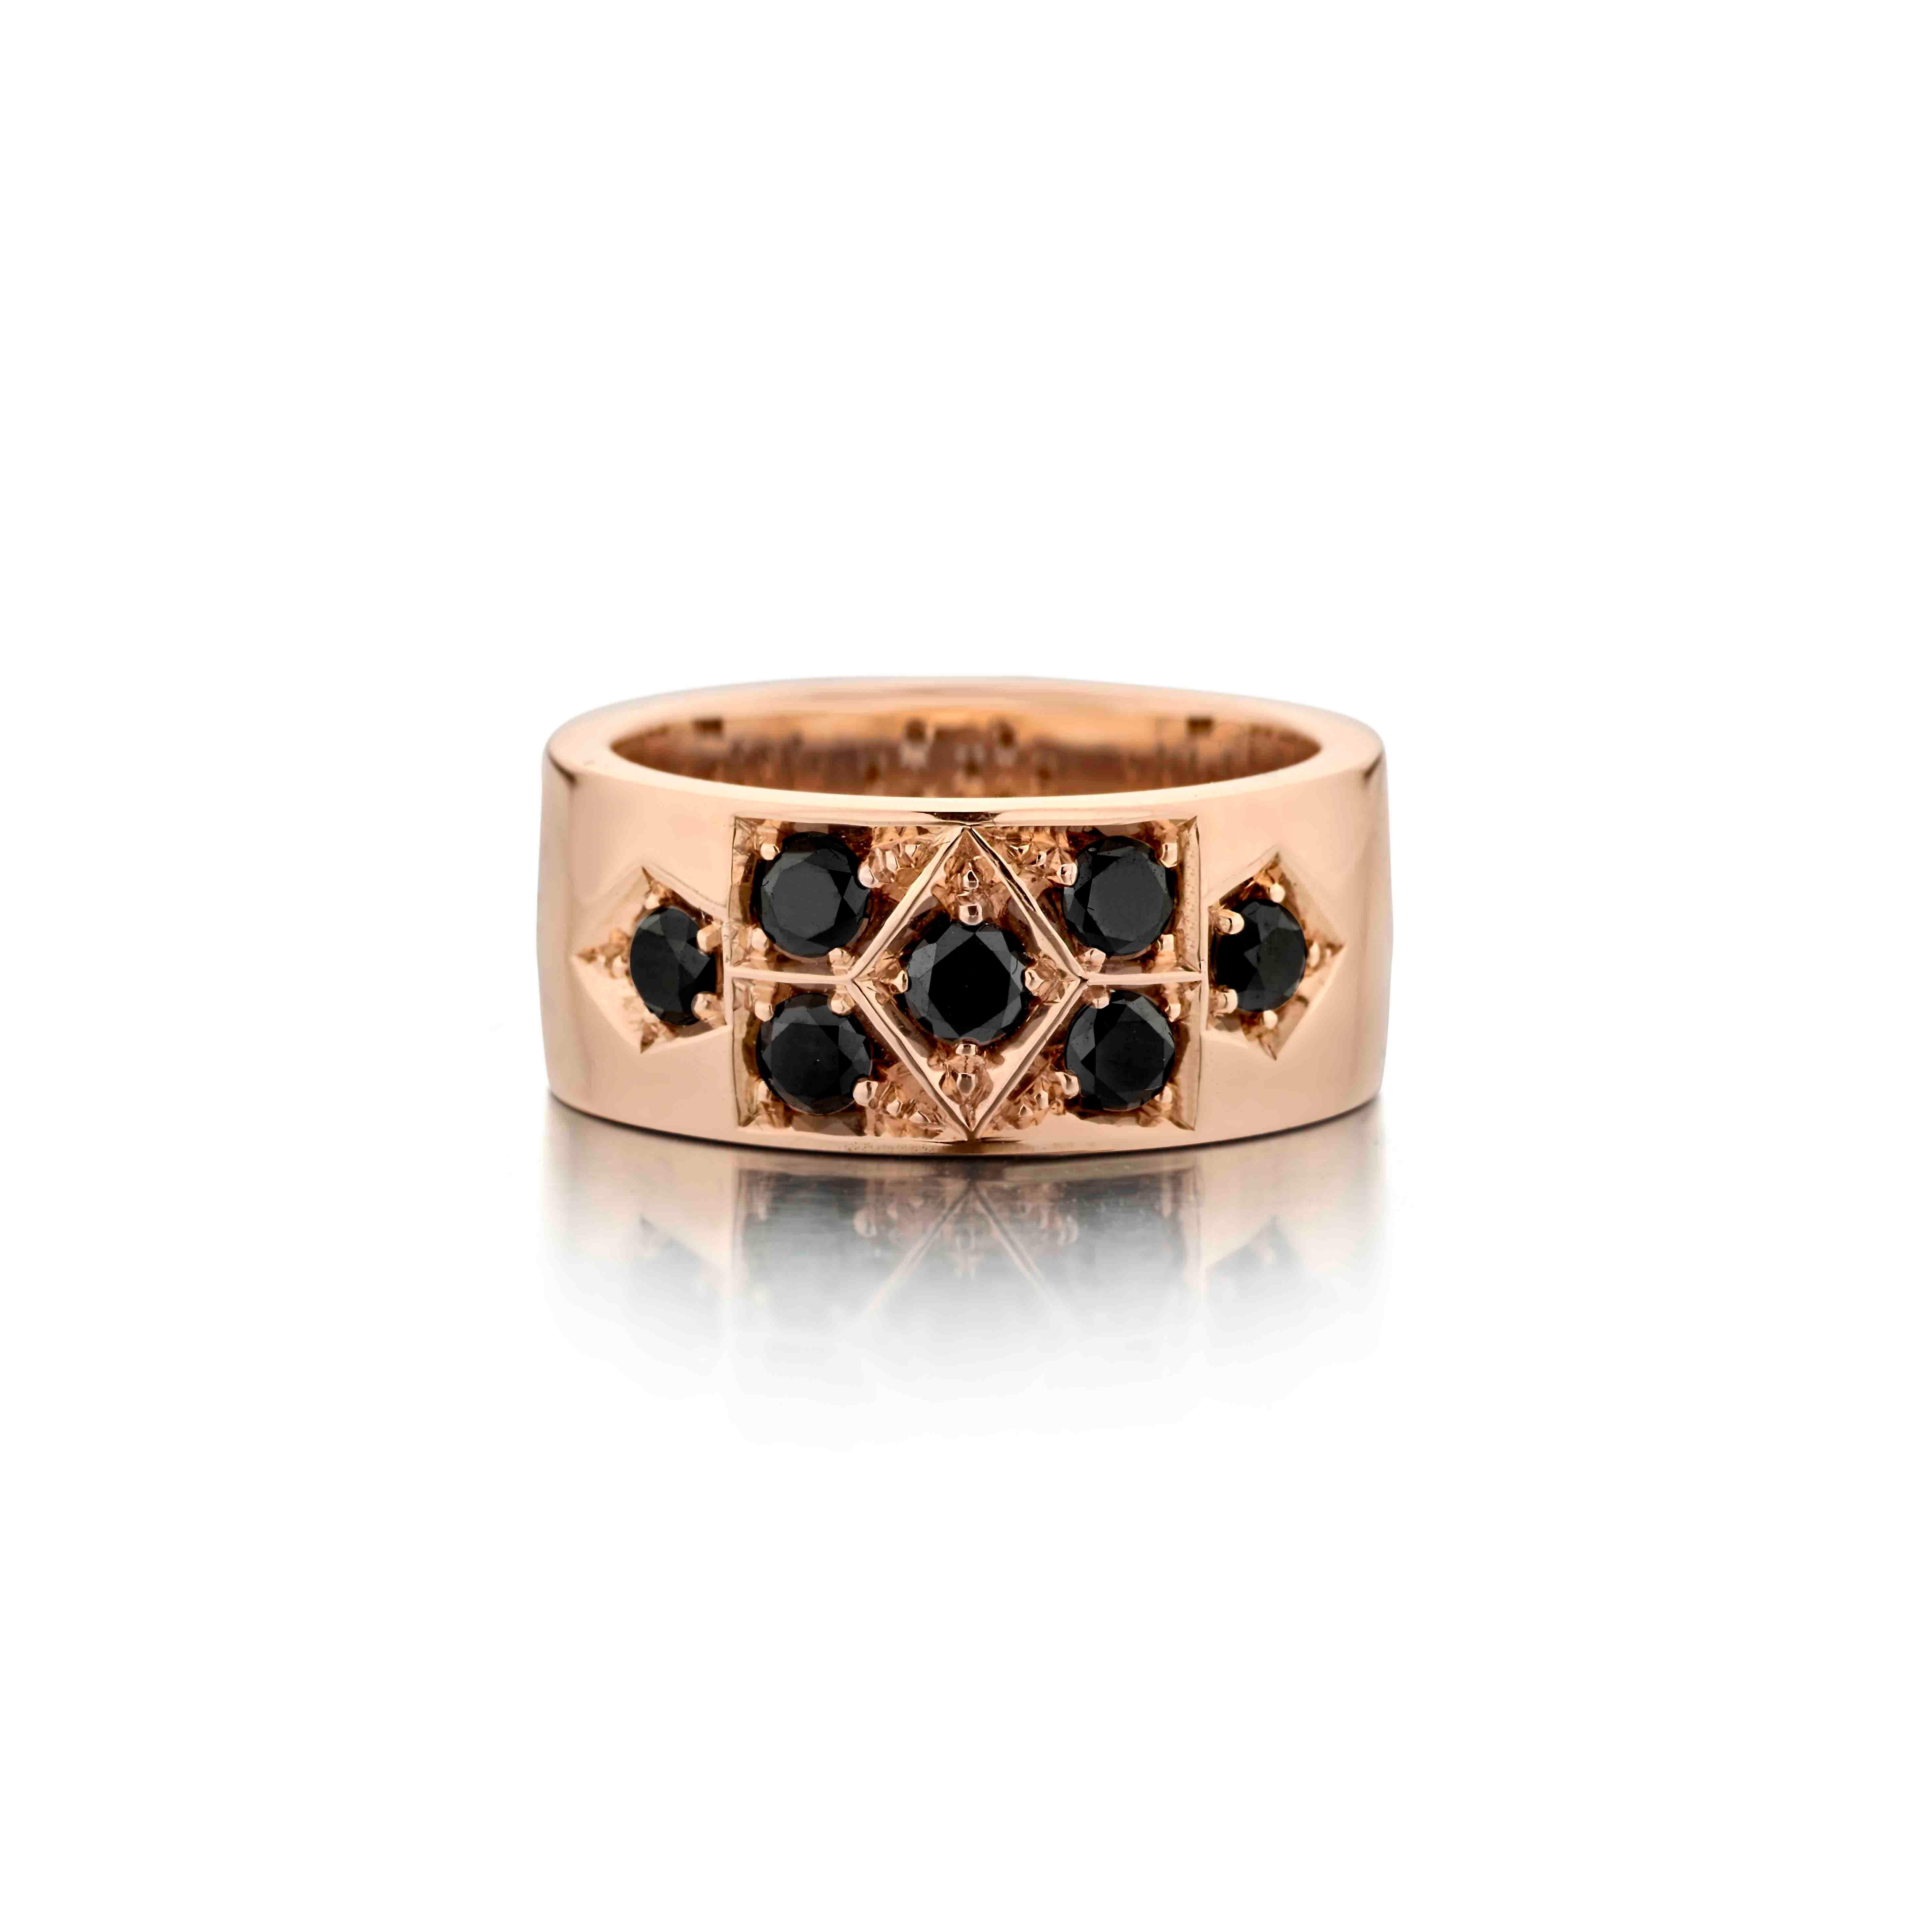 18 Karat Rose Gold ring featuring Collection grade Black Diamonds of 0.42 Carat.
Set in a crossed pattern featuring 7 Black Diamonds.

This Black Diamond Wedding Ring is one of Jochen's signature designs.
